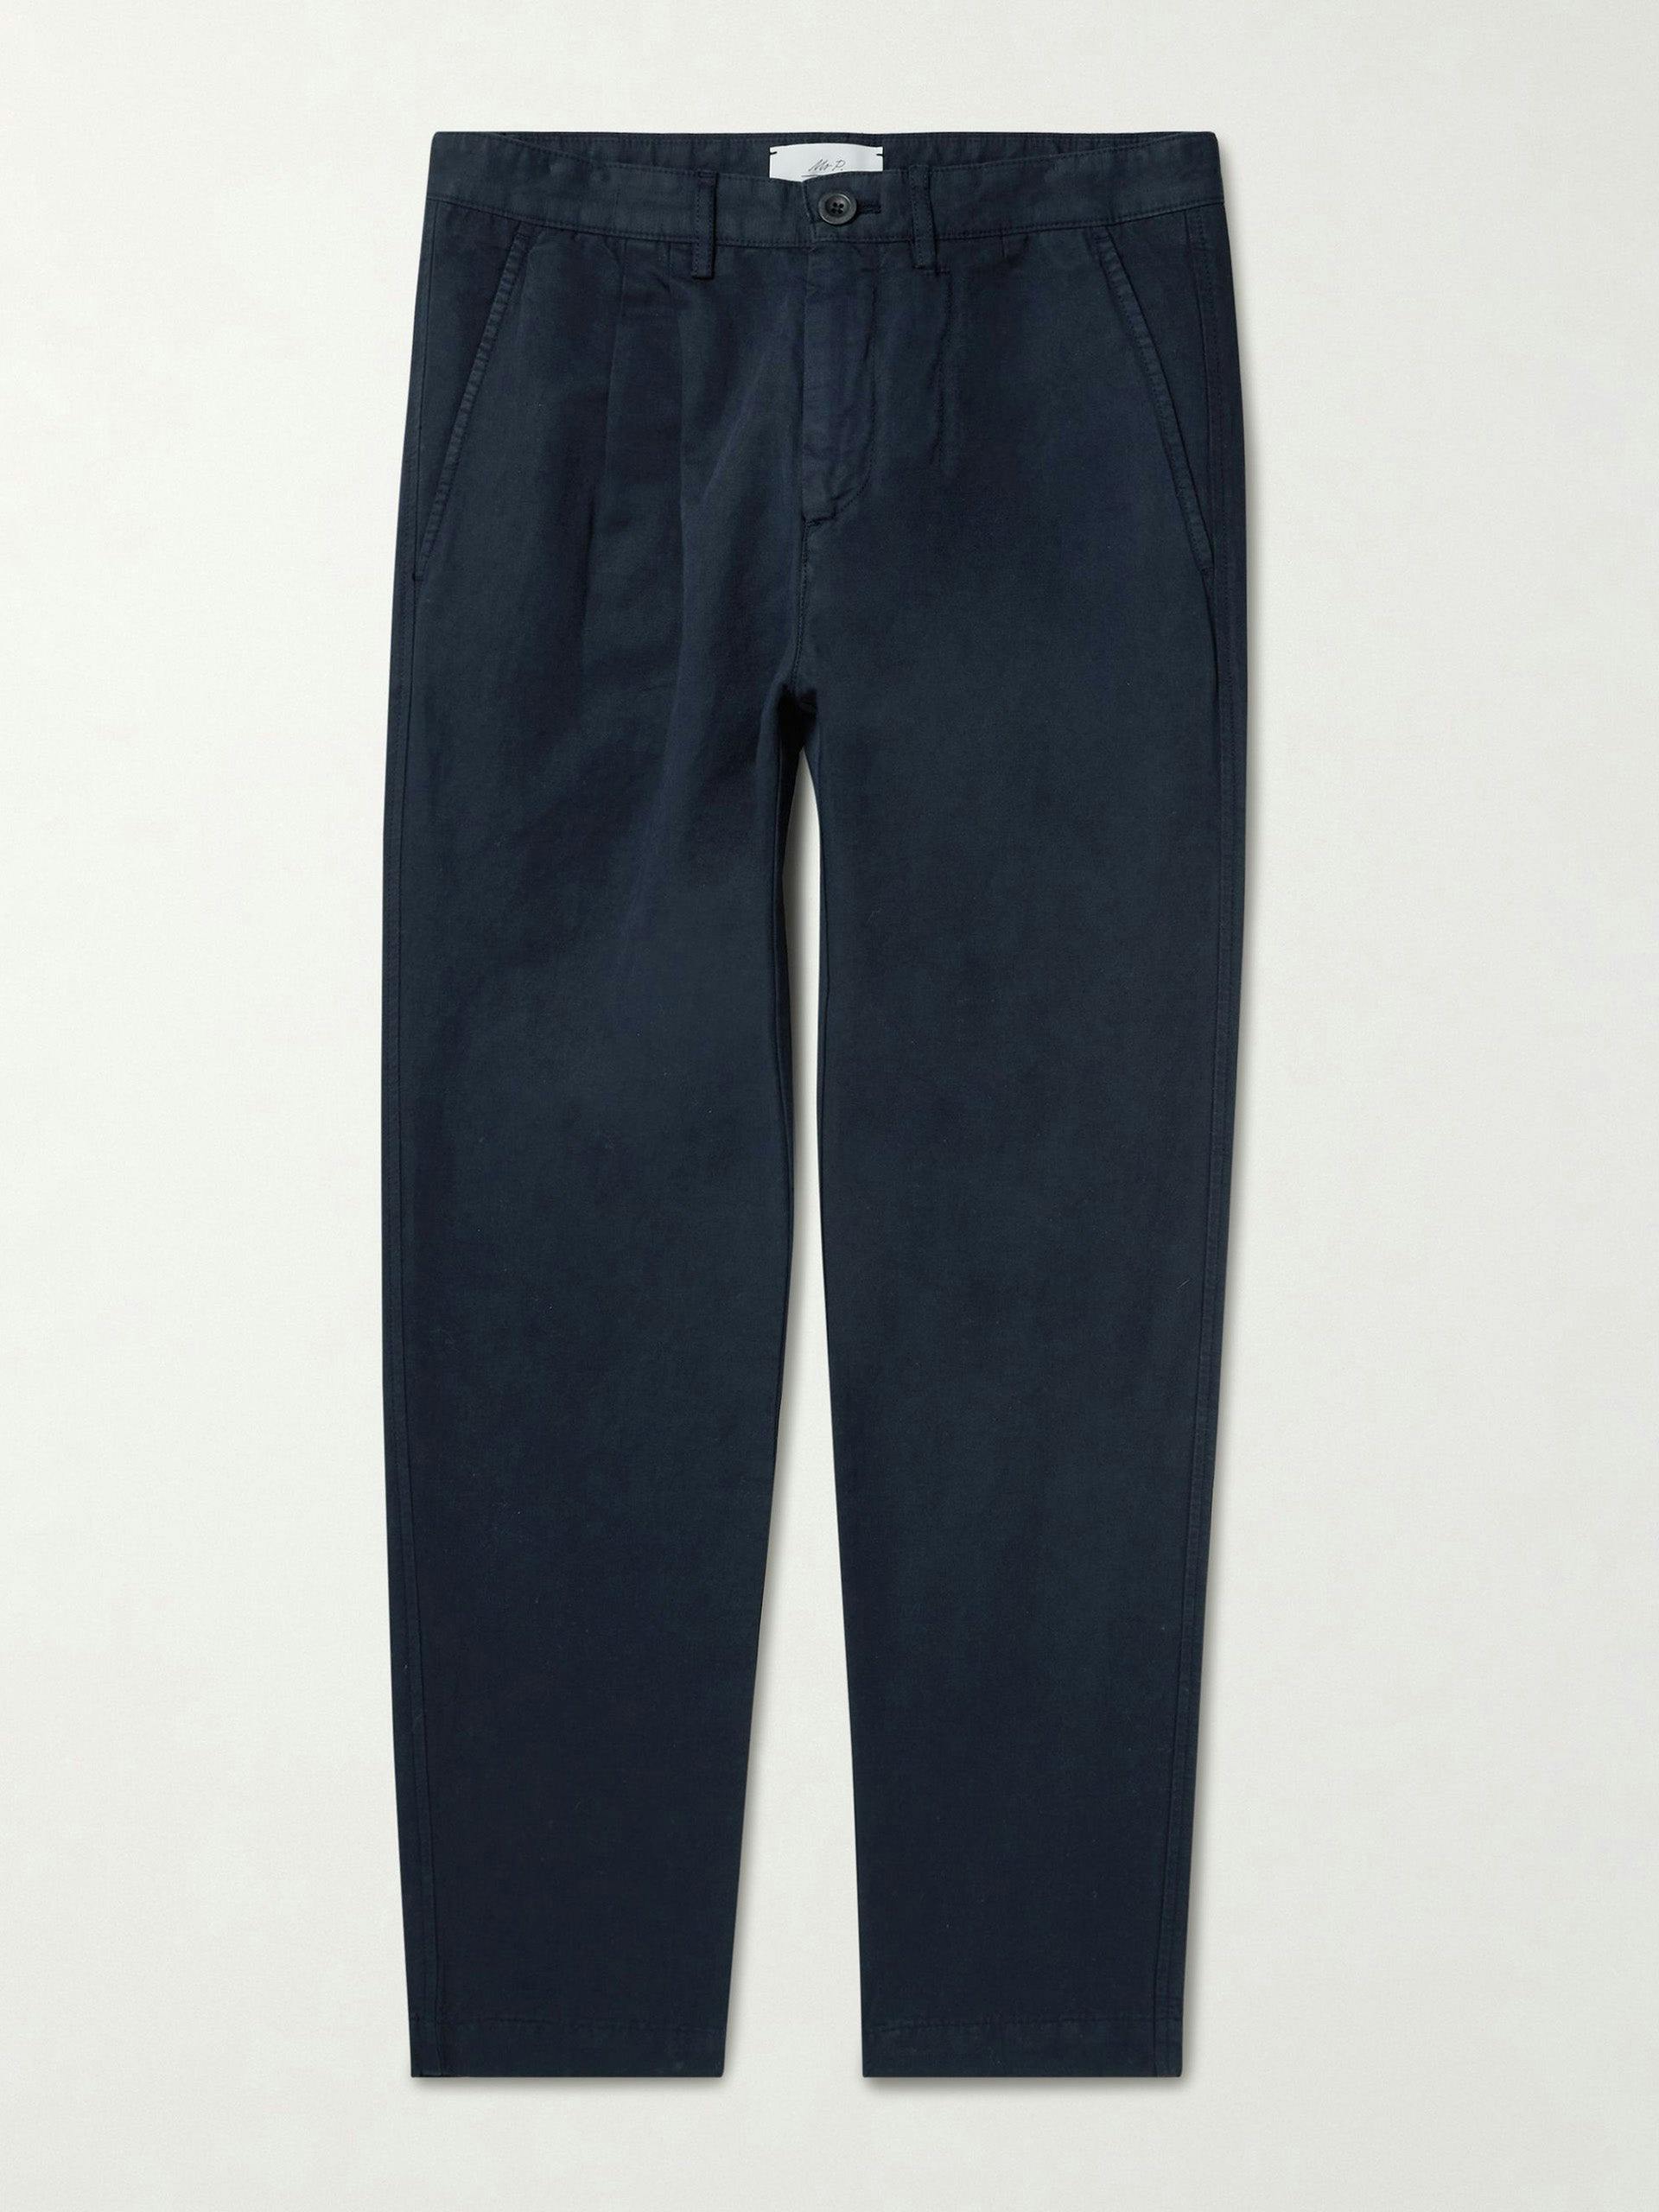 Navy pleated cotton and linen-blend trousers